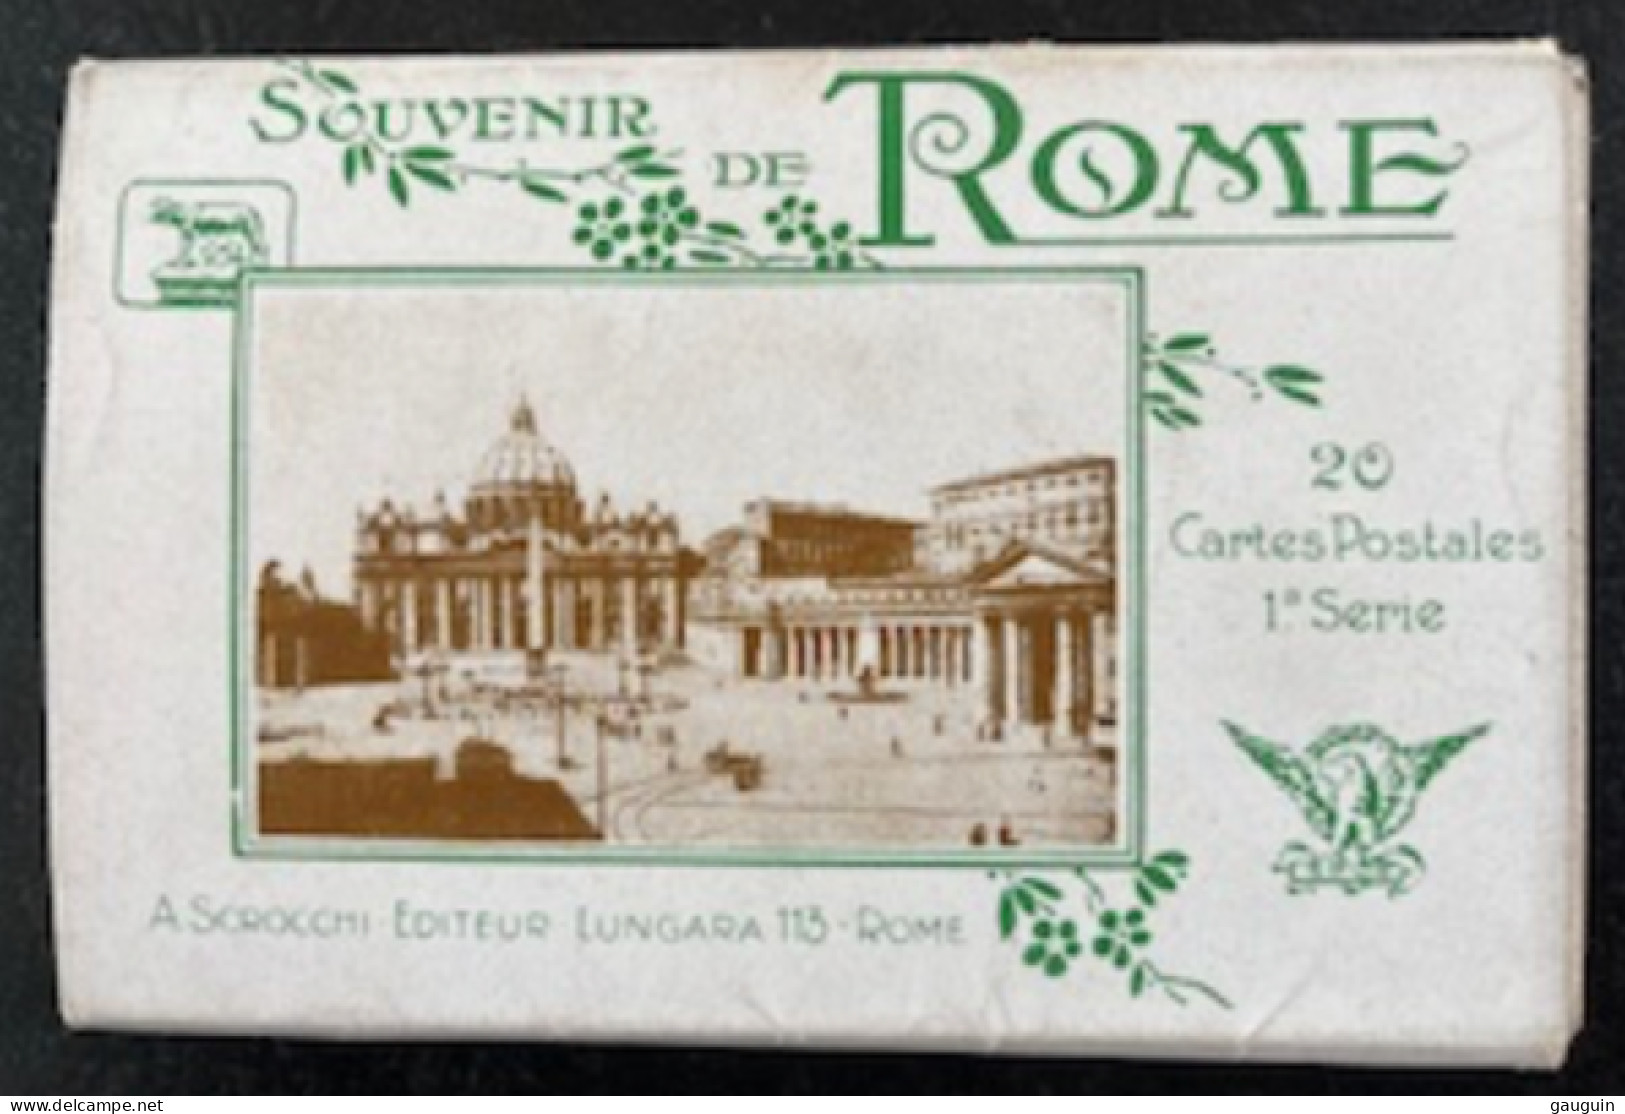 CPA - ROMA - Carnet 20 Vues Incomplet (1 CP Manquante) - Edition A.Scrocchi - Andere Monumente & Gebäude